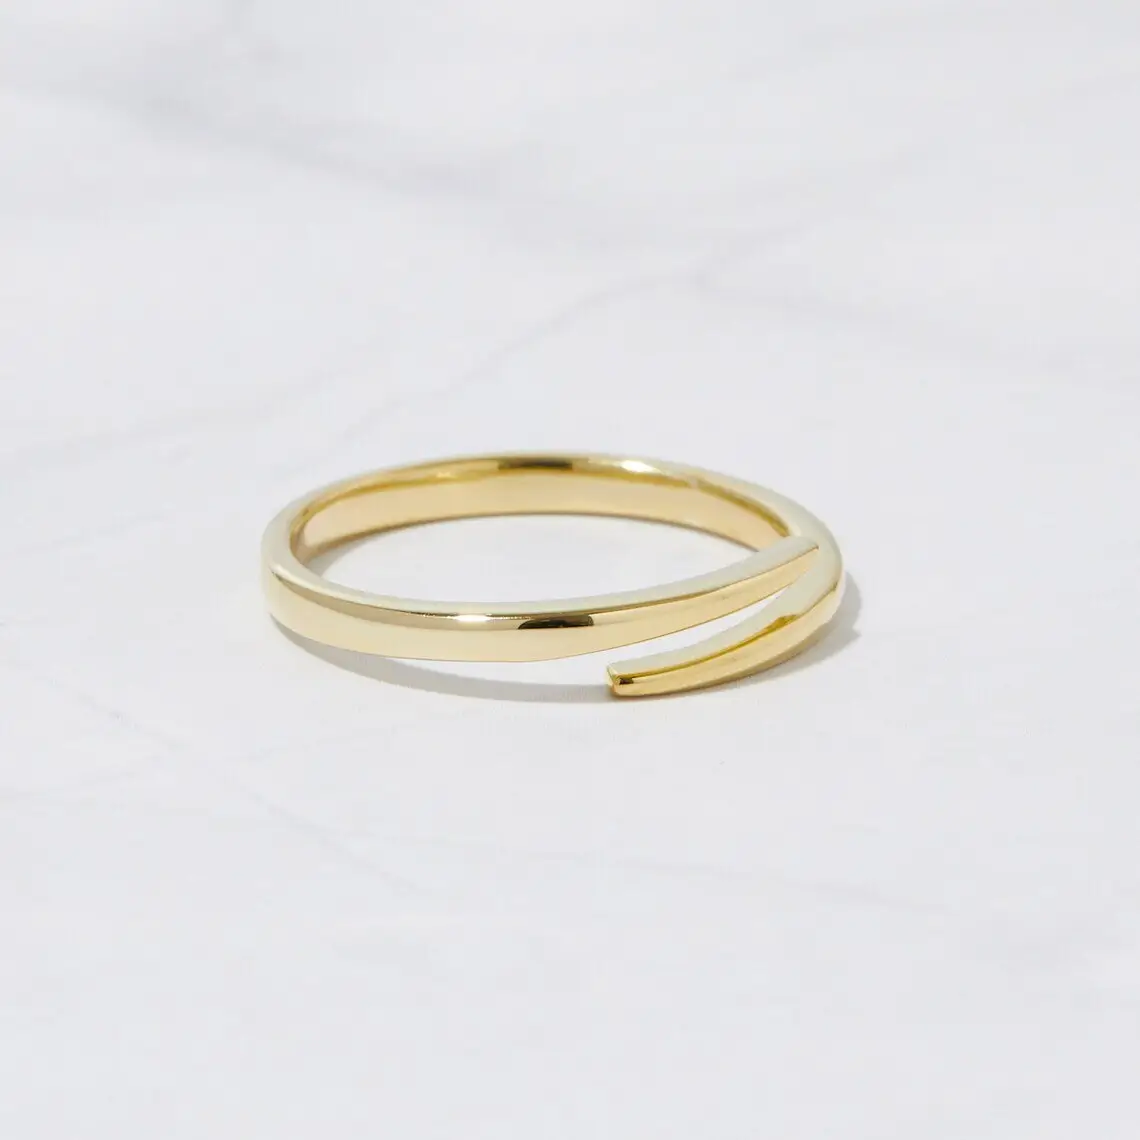 18k Gold Plated Dainty Minimalist Stacking Ring Minimalist Fashionable Snake Spiral Ring Perfect Gift For Women